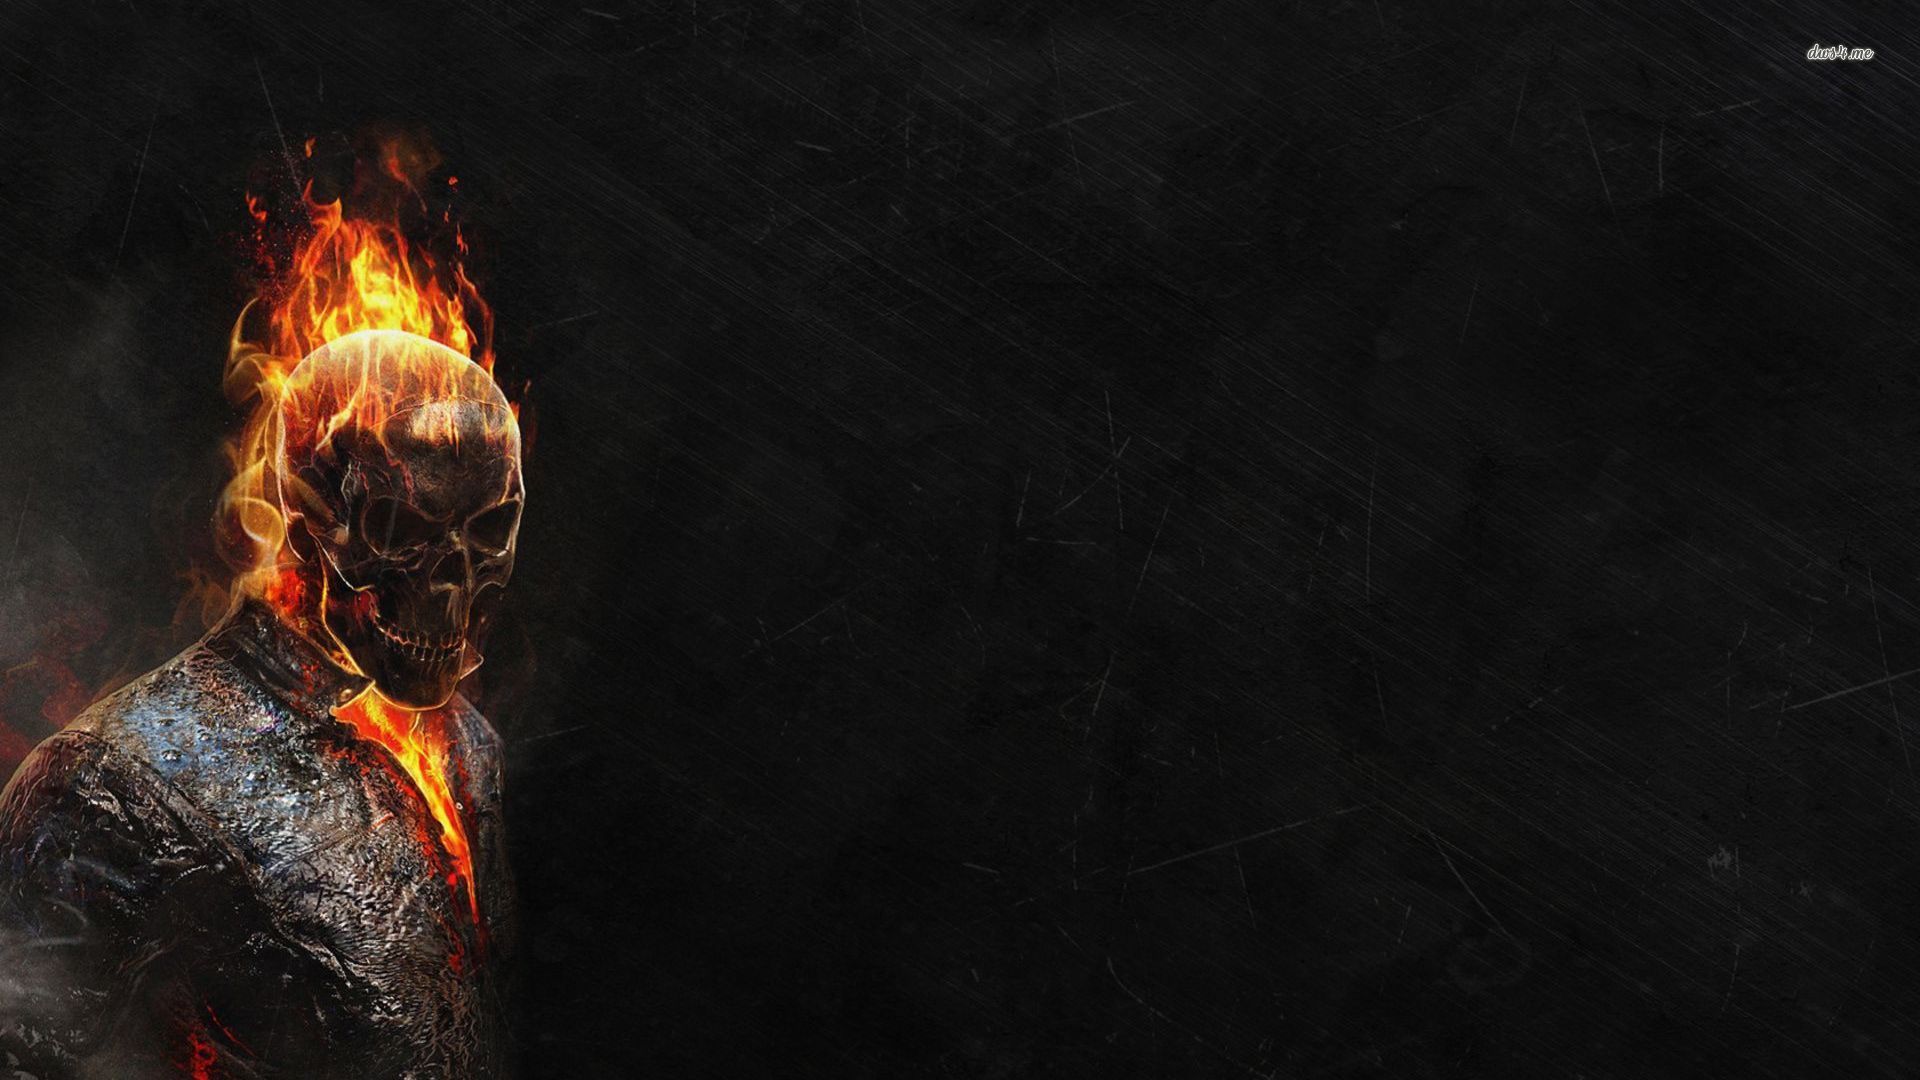 Ghost Rider wallpaper - Movie wallpapers - #17309